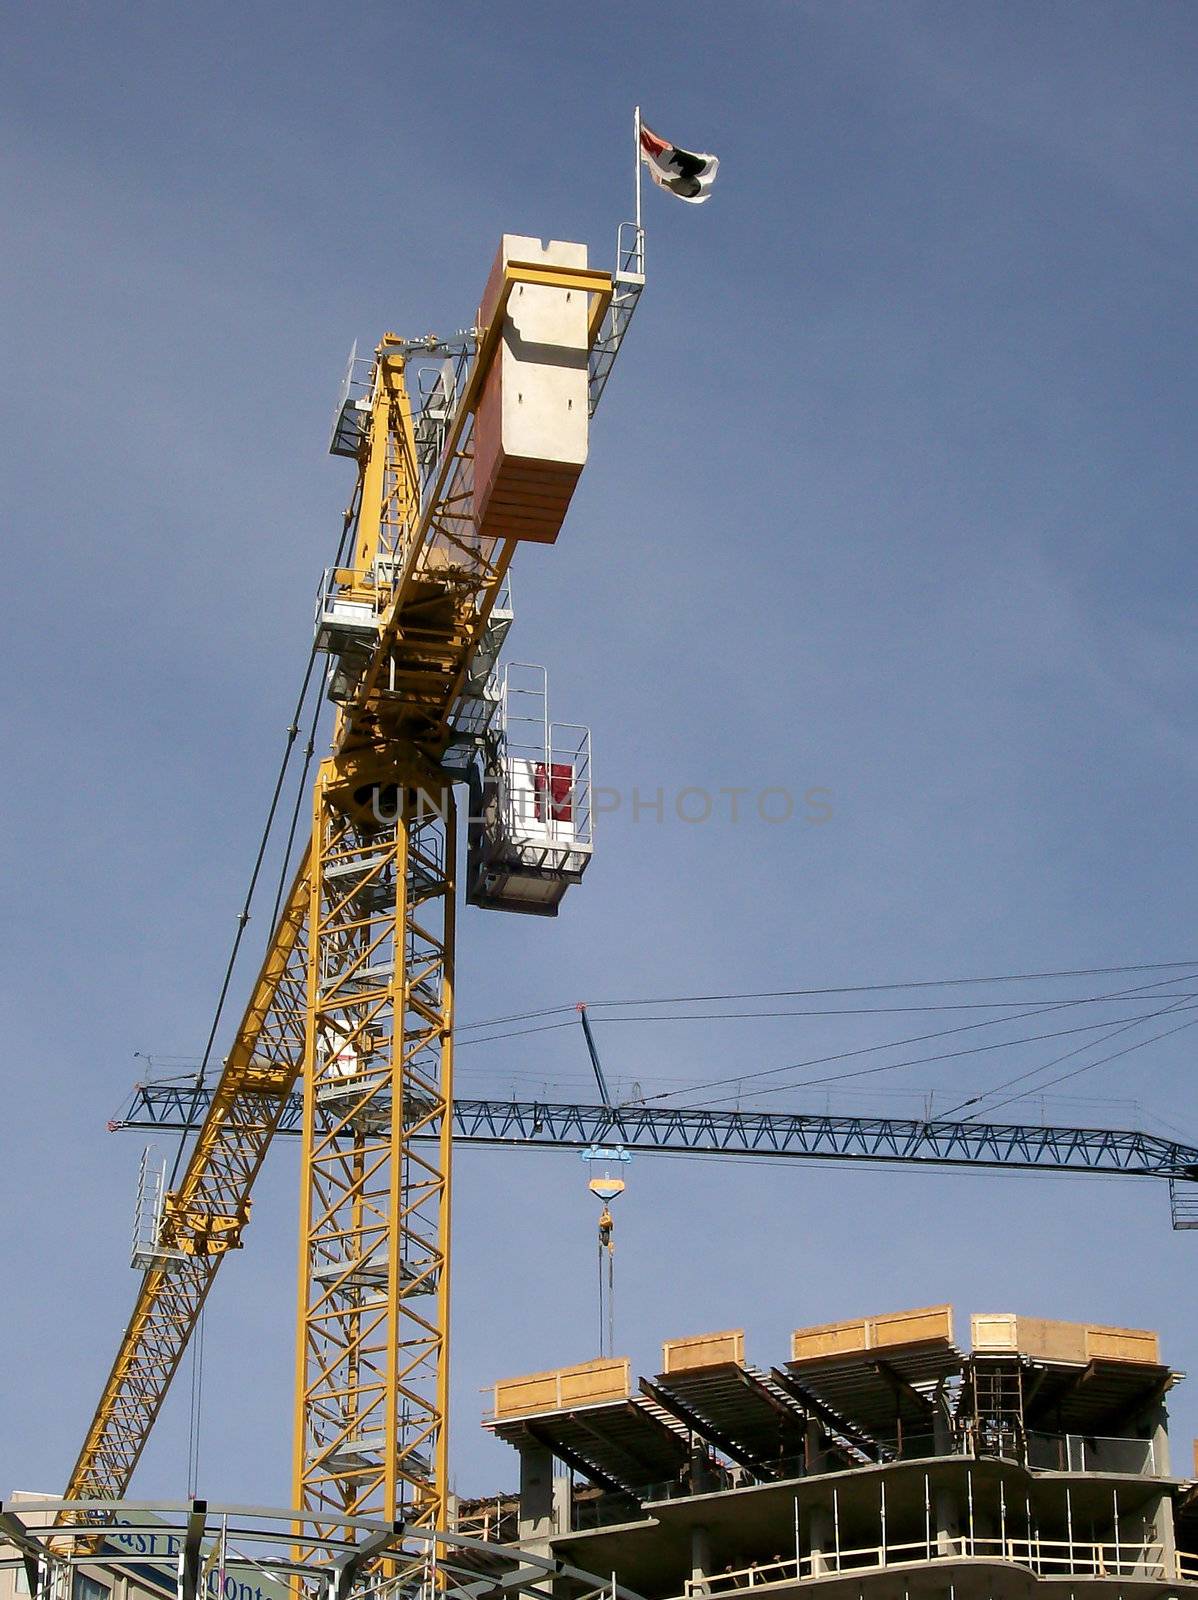 Cranes criss cross carrying loads to the highest levels.